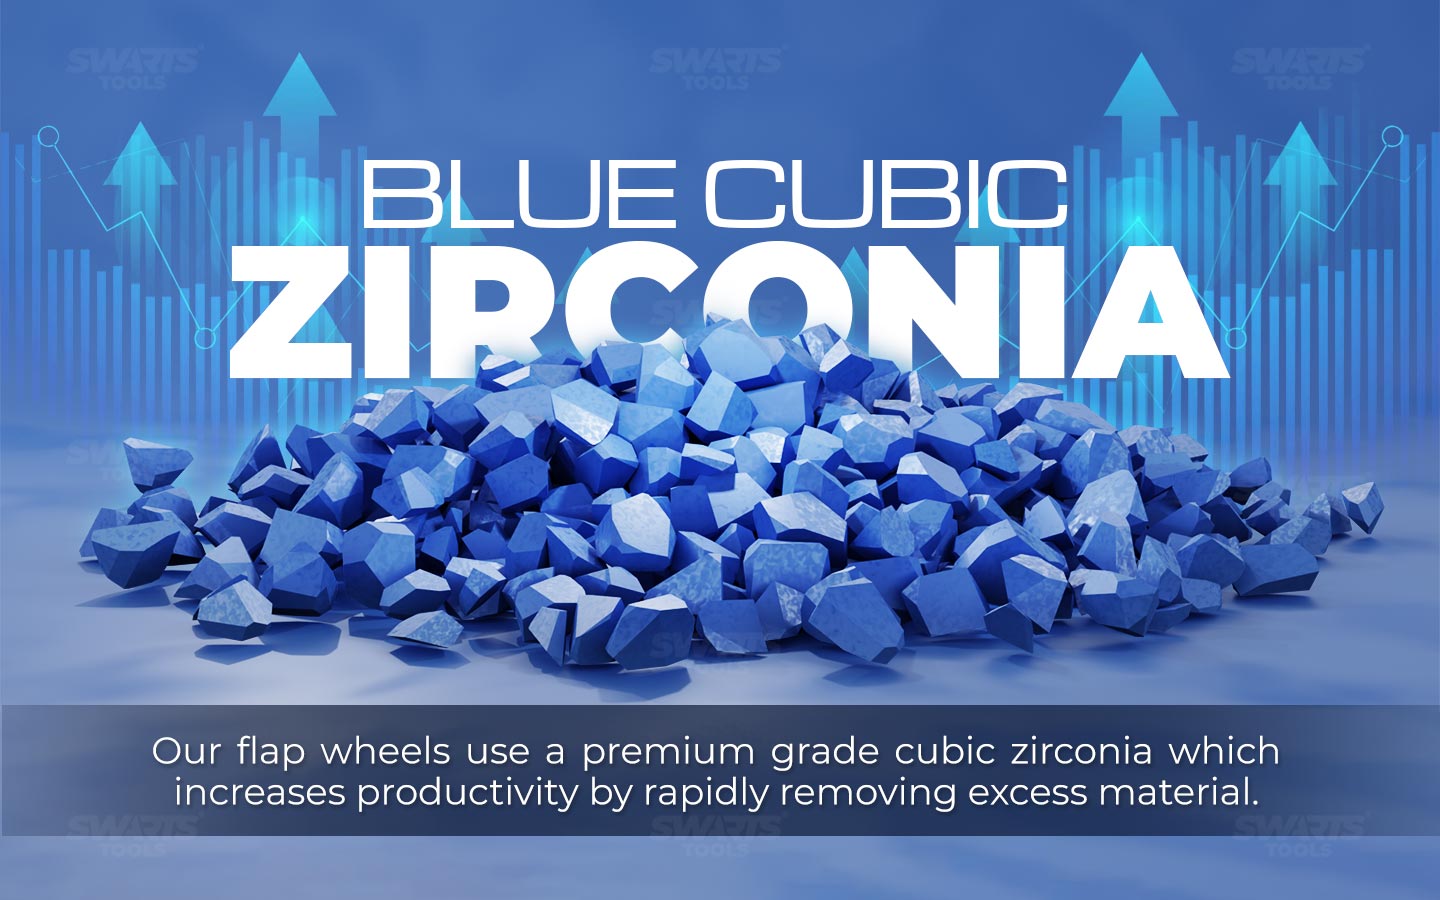 made from premium grade blue cubic zirconia, increases productivirt by rapidly removing excess material